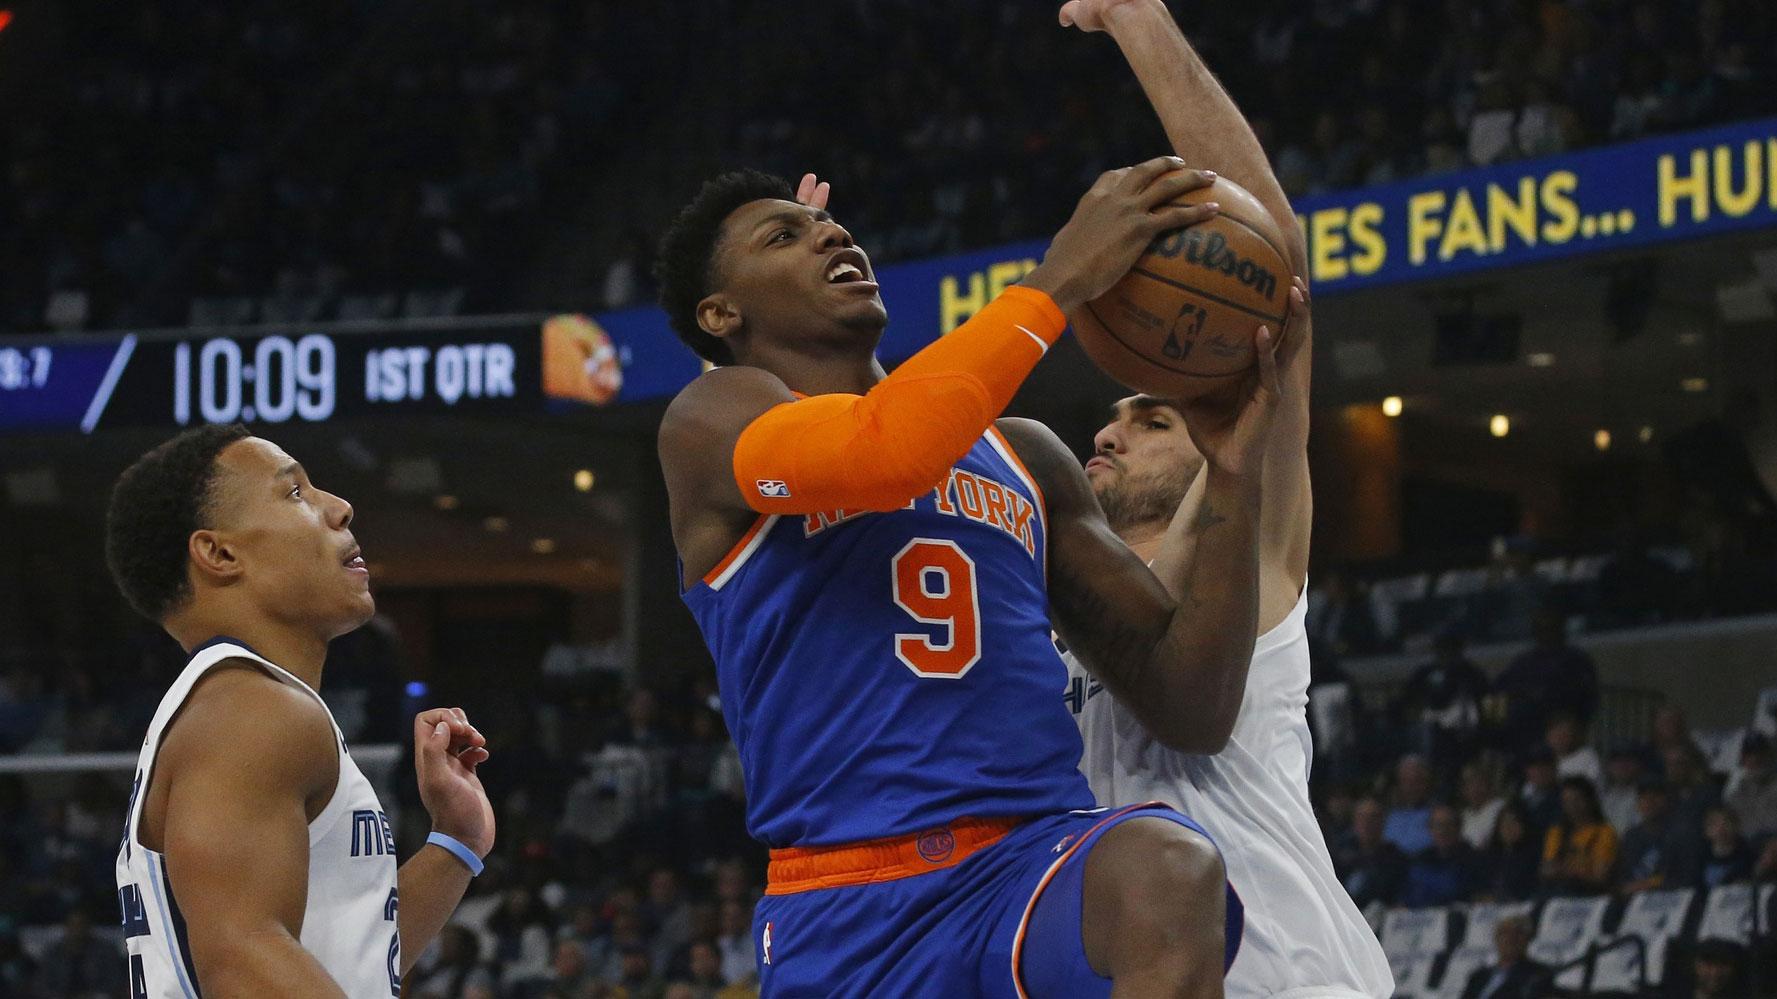 Oct 19, 2022; Memphis, Tennessee, USA; New York Knicks guard RJ Barrett (9) drives to the basket between Memphis Grizzlies guard Desmond Bane (left) and forward Santi Aldama (right) during the first quarter at FedExForum. / Petre Thomas-USA TODAY Sports